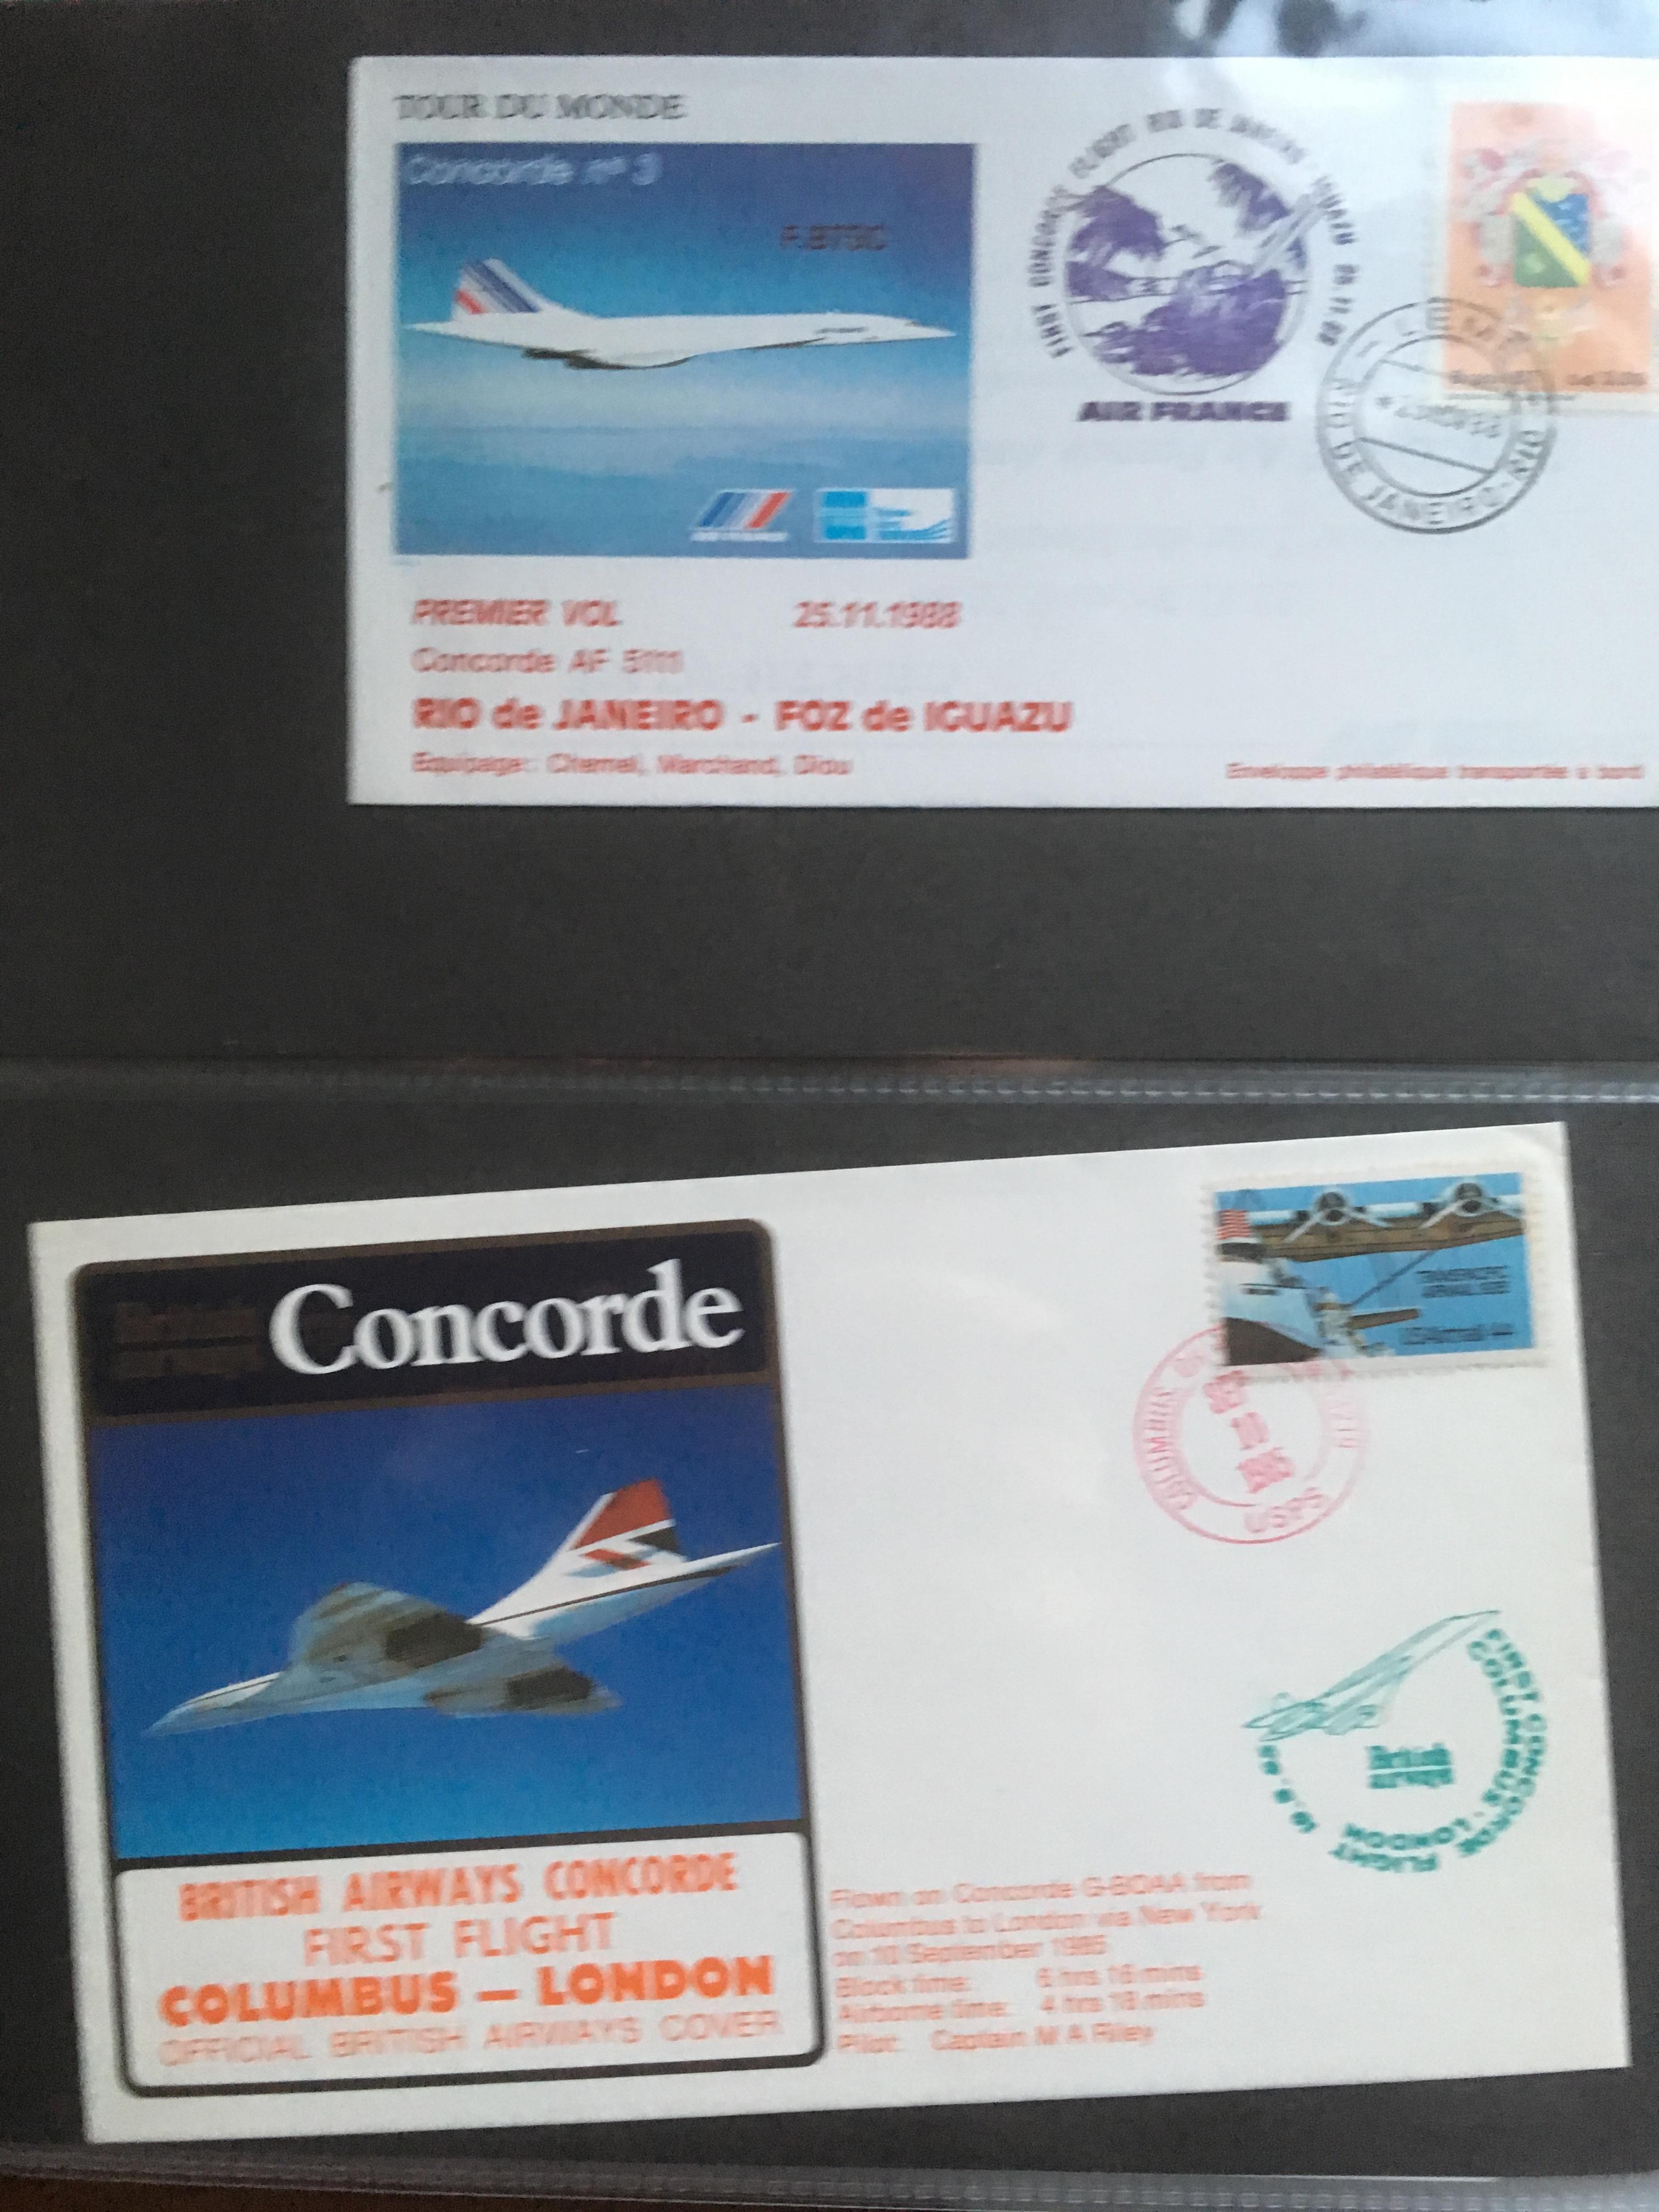 ALBUM WITH A COLLECTION OF CONCORDE FLIGHT COVERS,